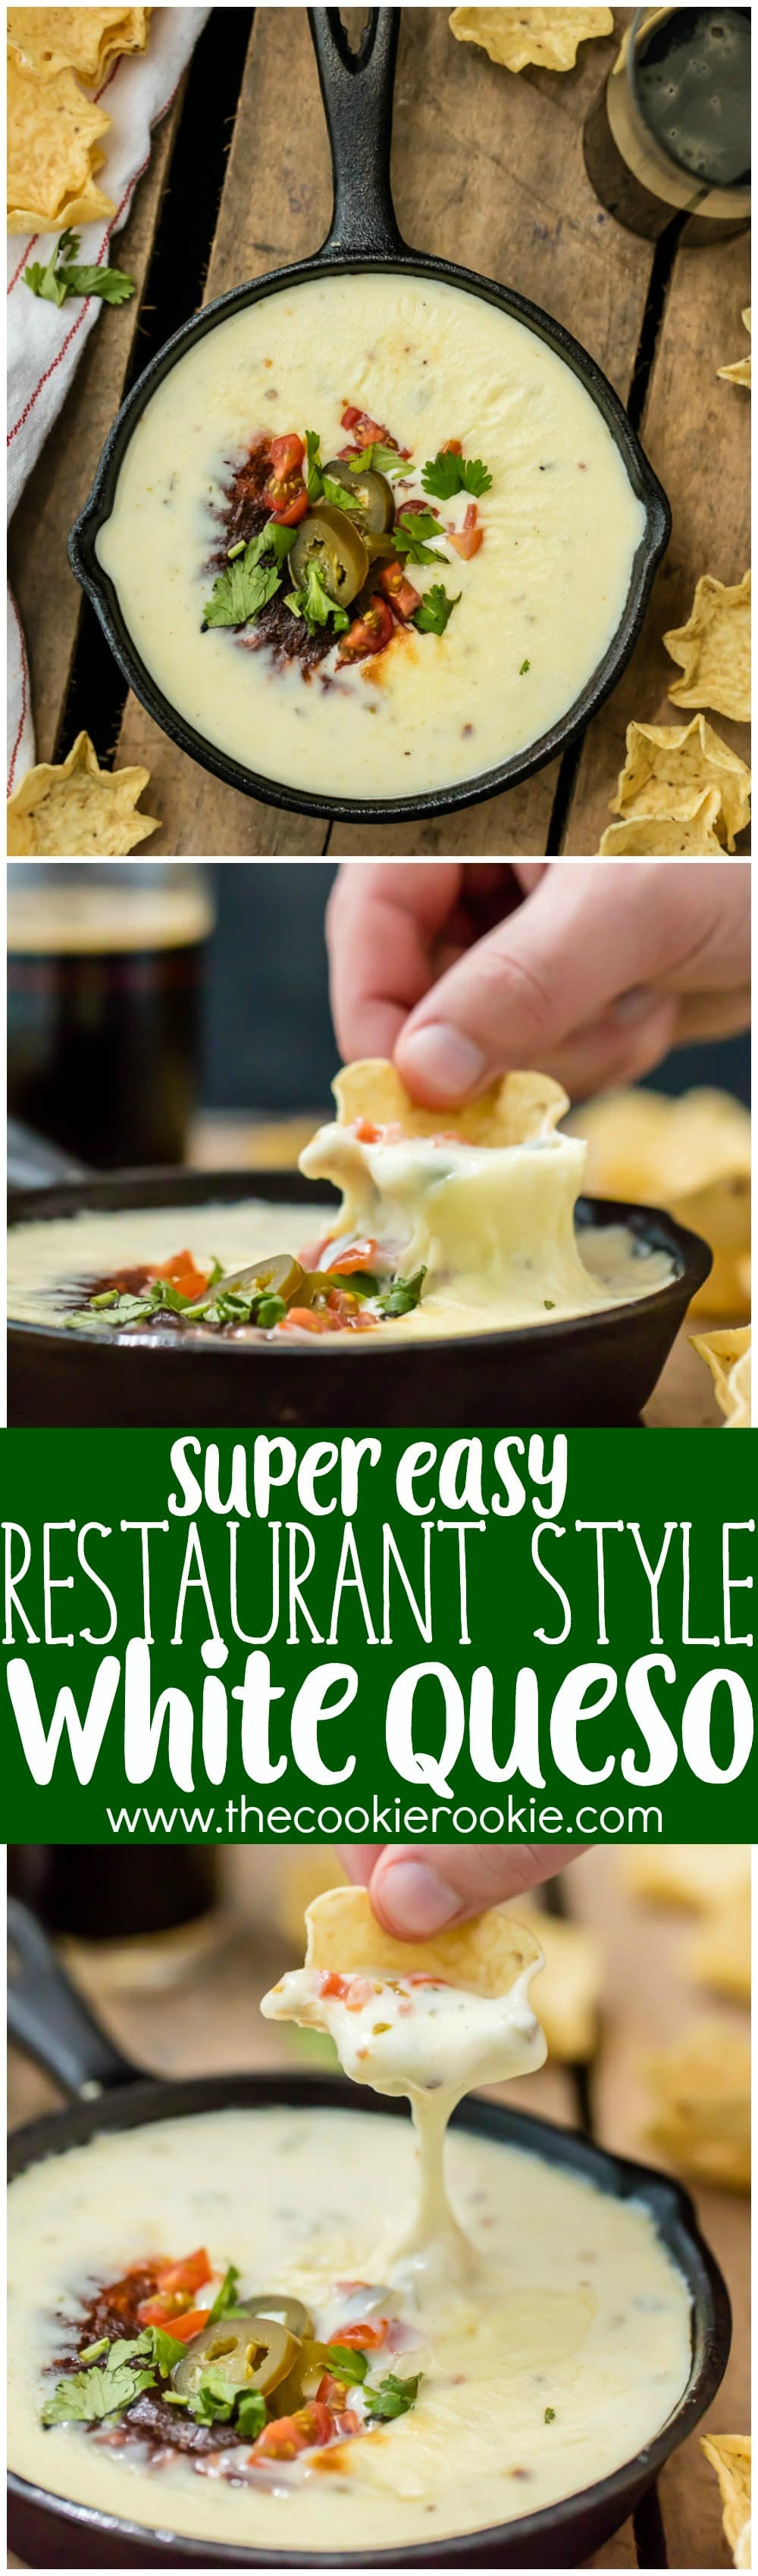 Easy Restaurant Style White Queso Queso Blanco - The Cookie Rookie